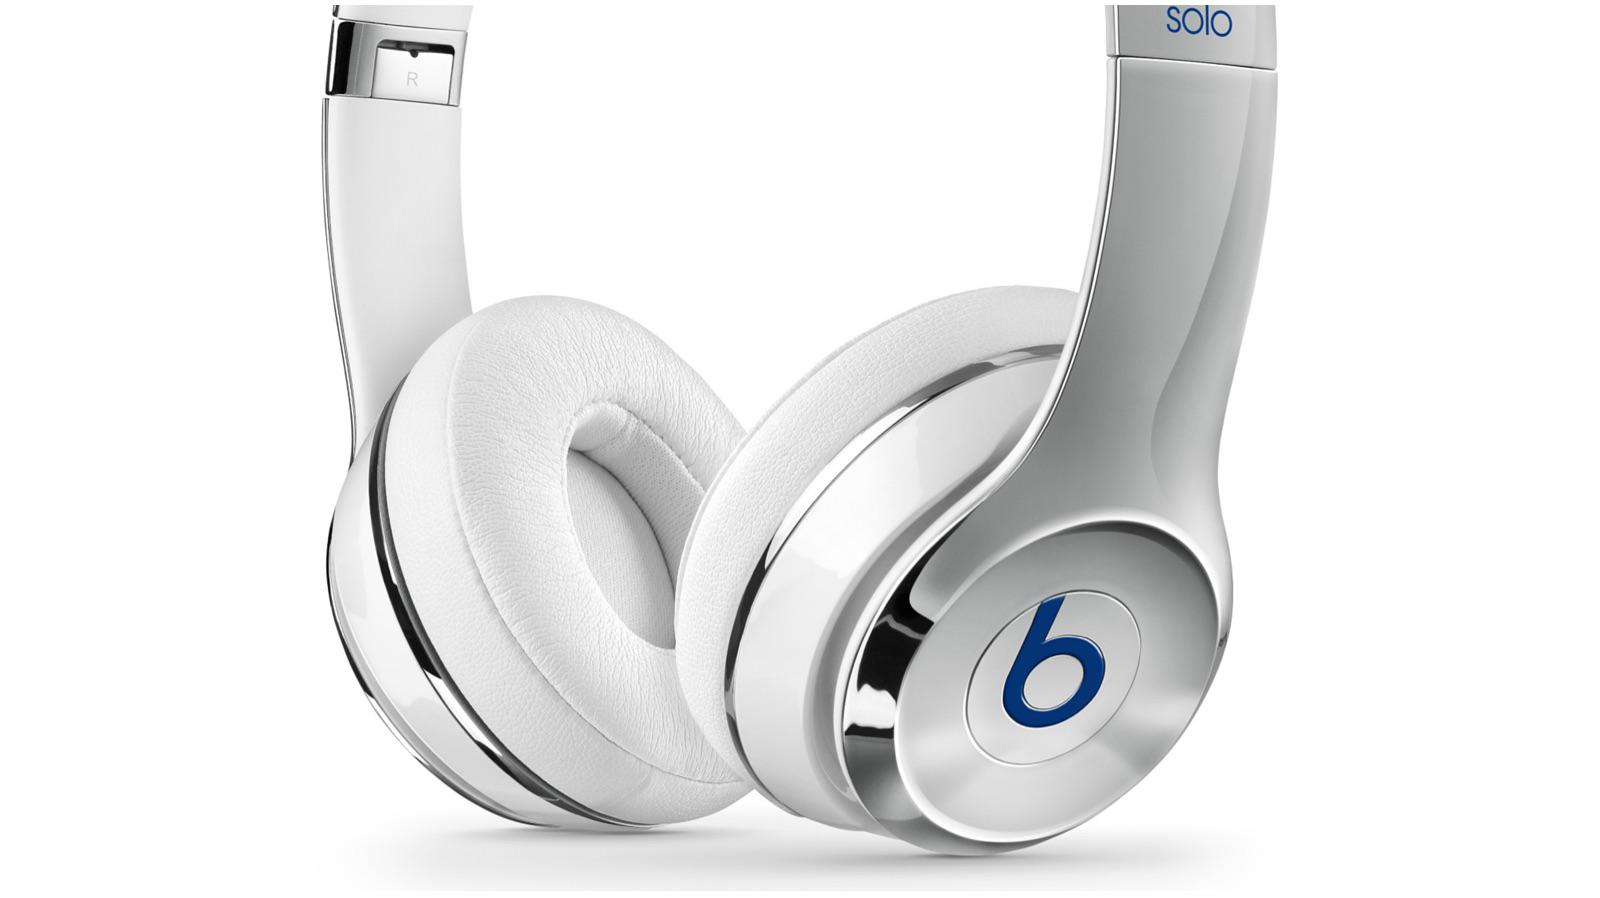 Mac Prices Australia on Twitter: "Customised in gloss silver - Beats by Dr. Dre Solo2 Fragment Special Edition - http://t.co/jFb78yWH21 http://t.co/QbL4NgaD2w" / Twitter